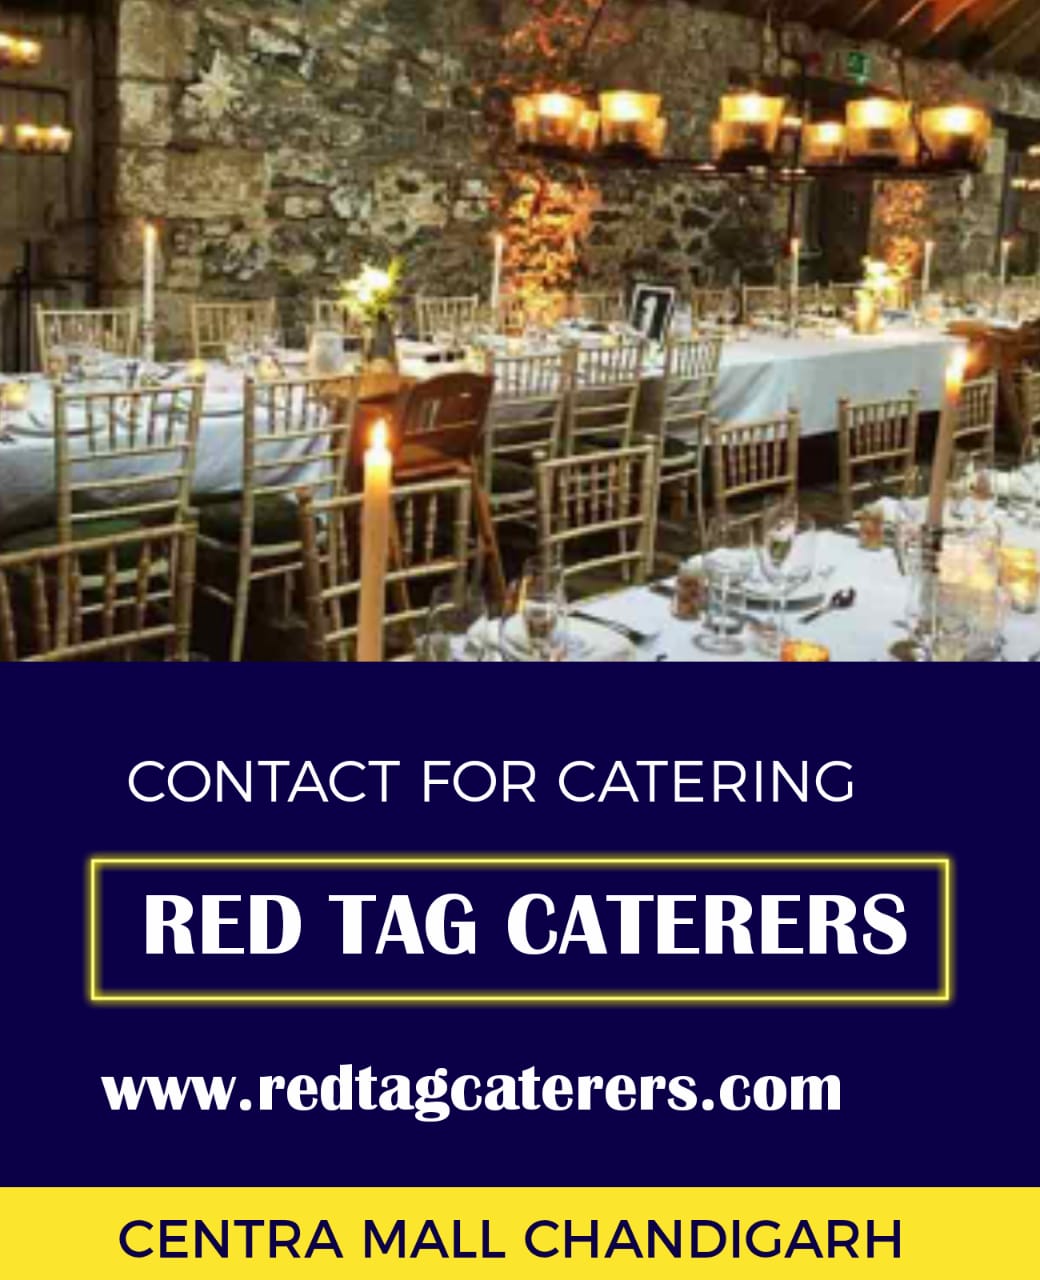 Red tag caterers is Best experience of many years and  serve all communities in around zirakpur, Mohali Punjab. | Red Tag Caterers | Best experience caterer in zirakpur Mohali punjab, best services caterer in zirakpur Mohali punjab,  best vegetarian caterer in zirakpur Mohali punjab, best non vegetarian caterer in zirakpur Mohali p - GL46432